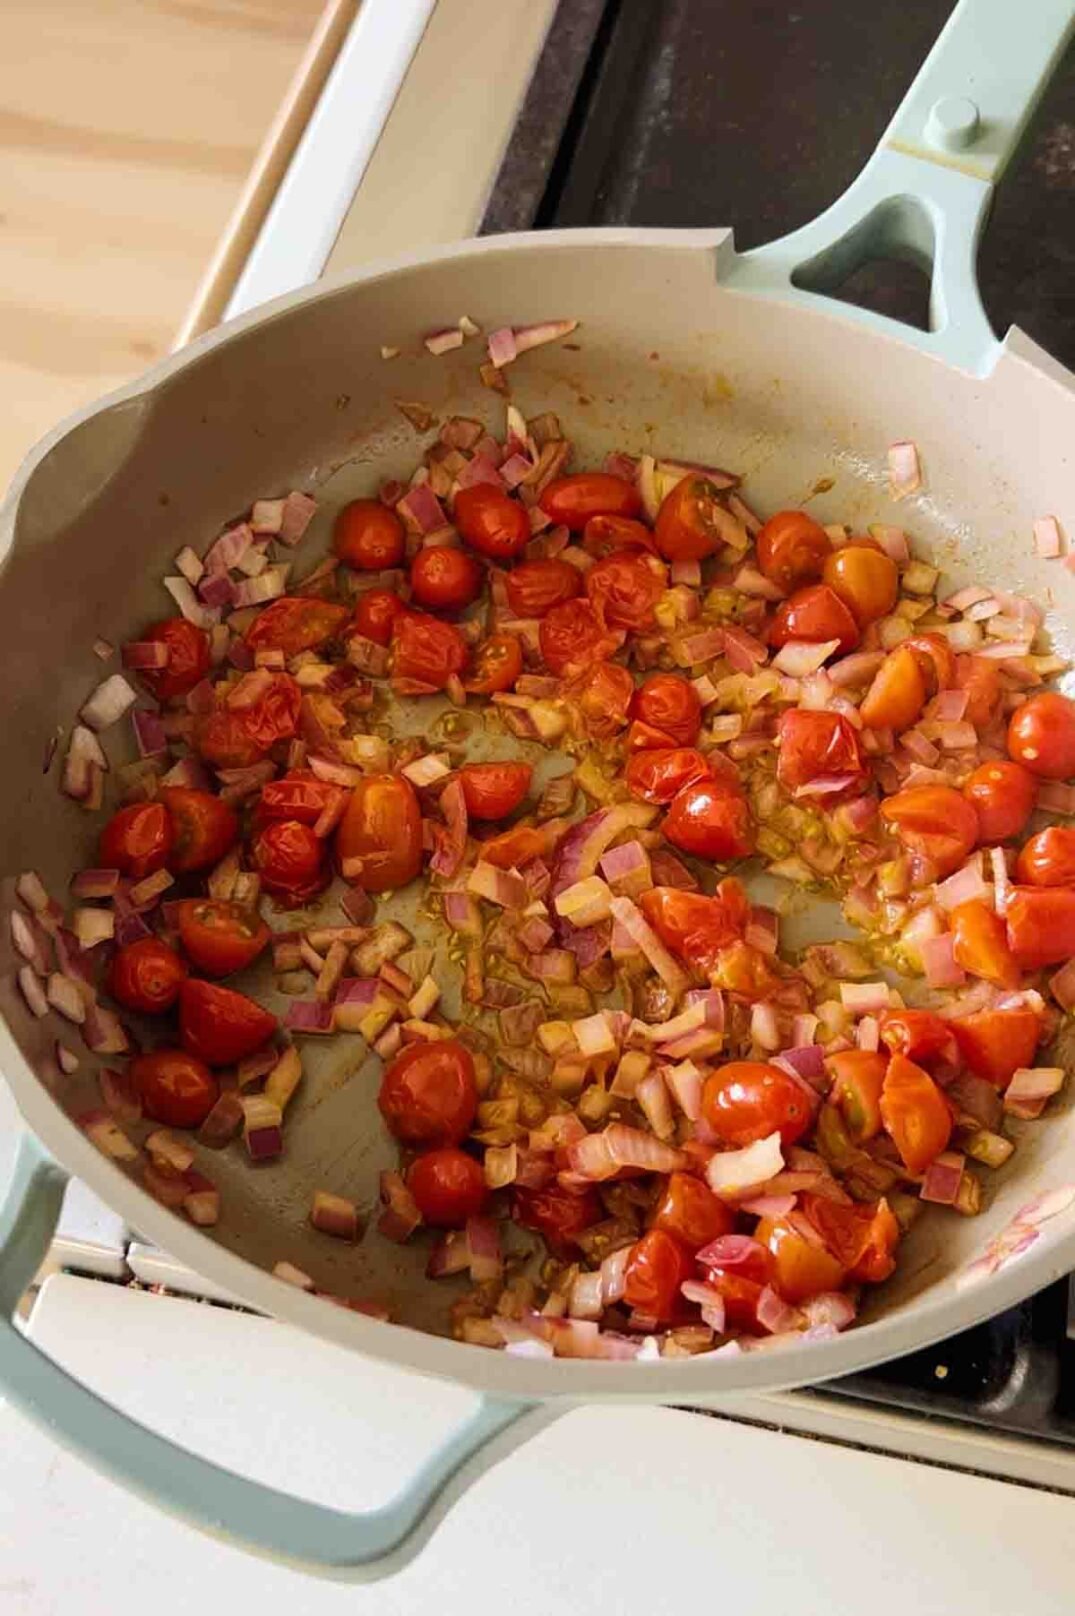 caramelized tomatoes and onions cooking in a blue pan.